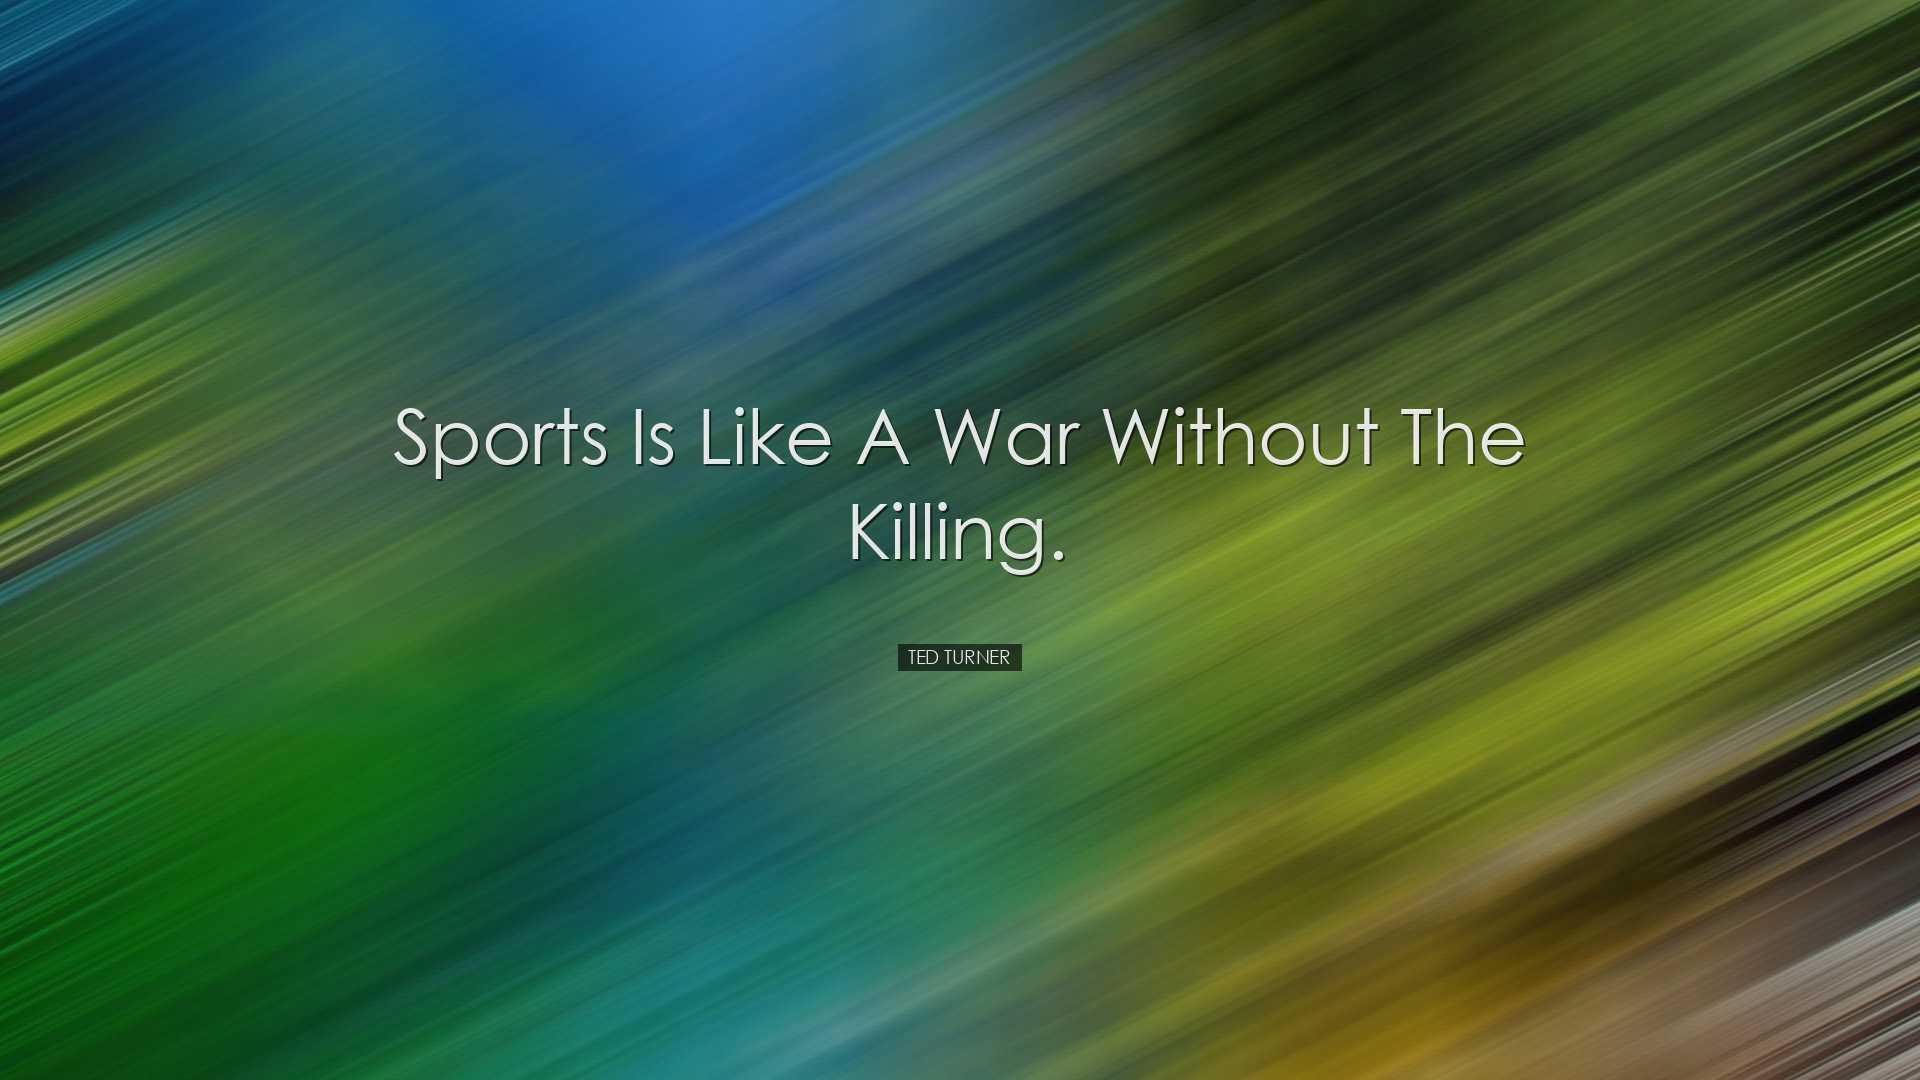 Sports is like a war without the killing. - Ted Turner